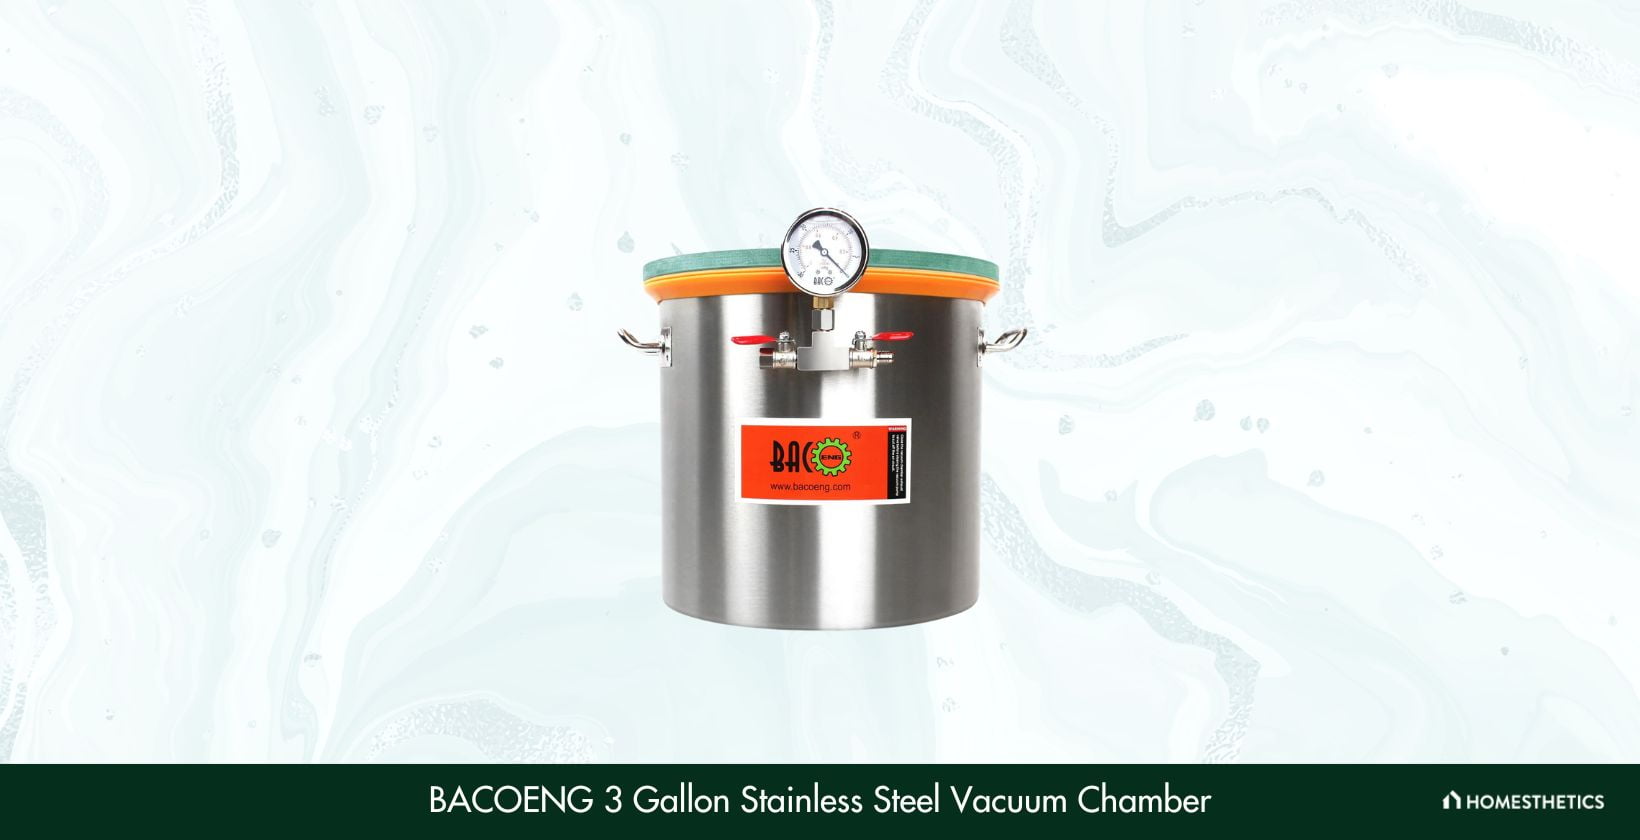 BACOENG 3 Gallon Stainless Steel Vacuum Chamber